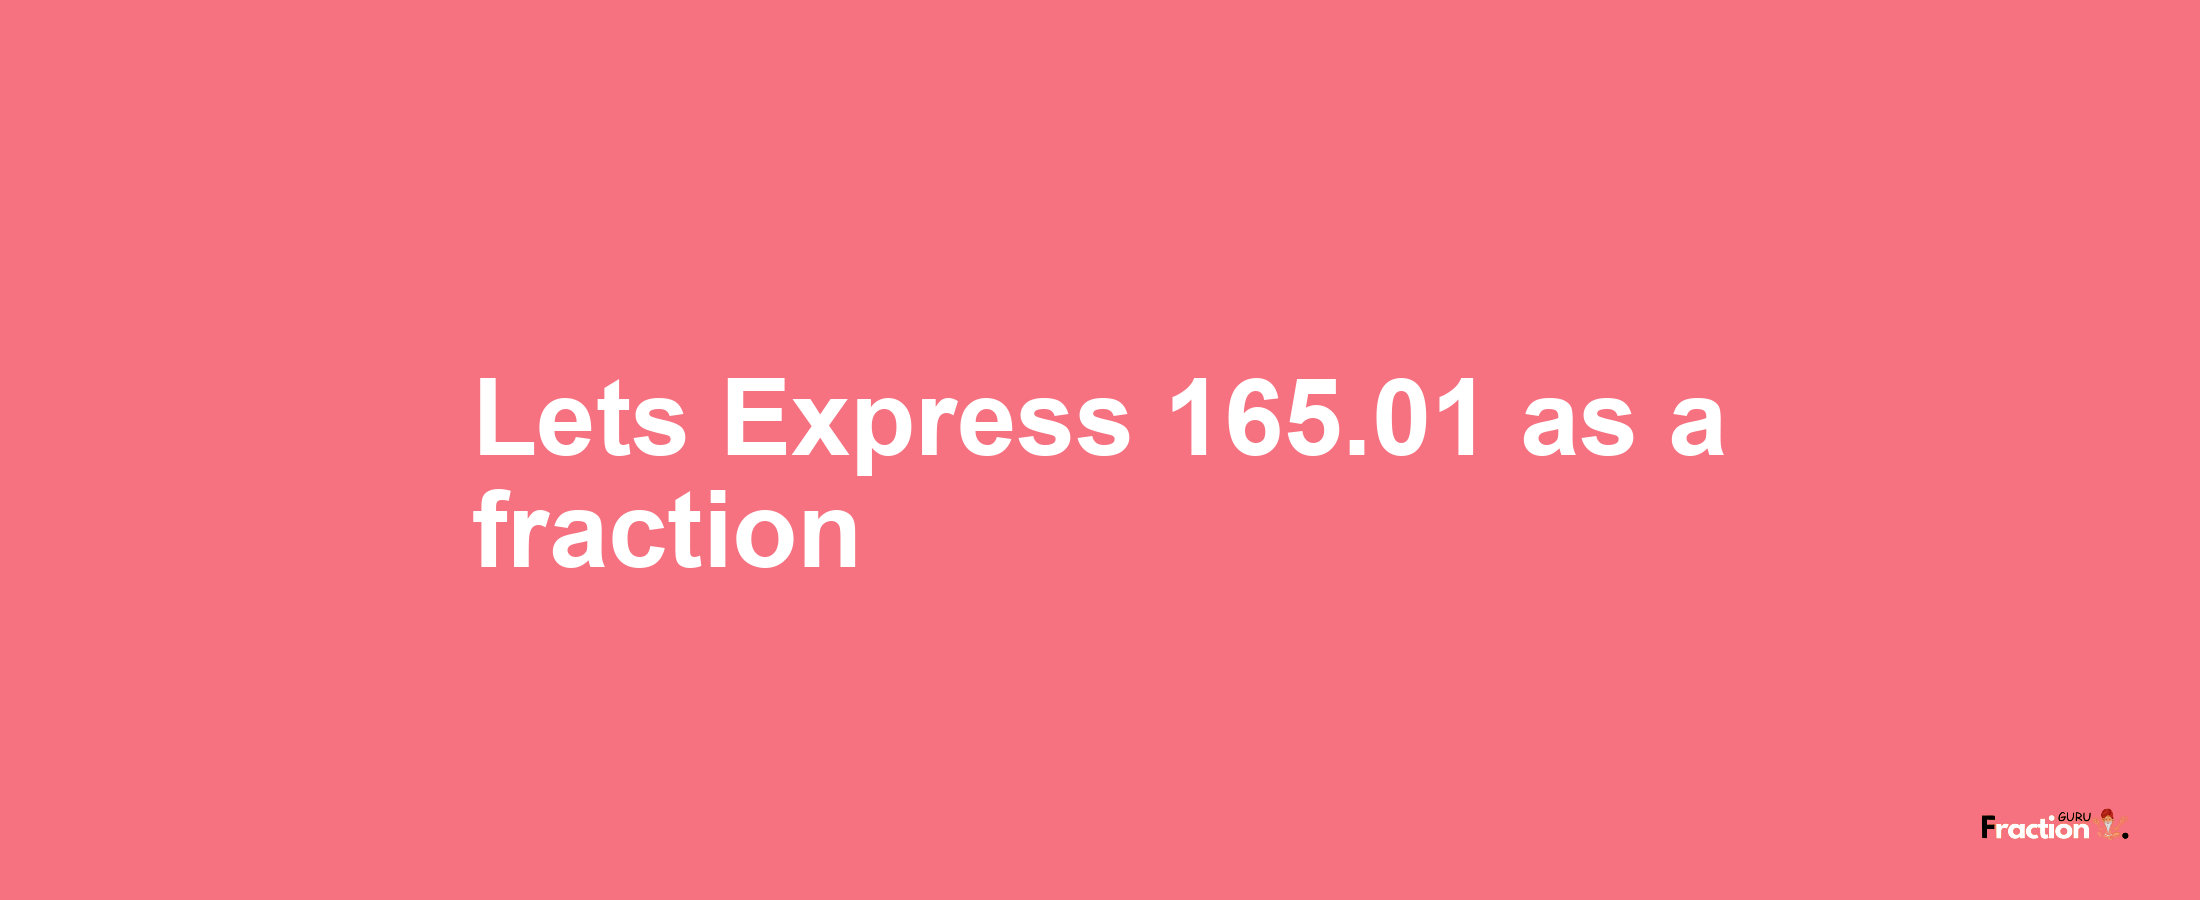 Lets Express 165.01 as afraction